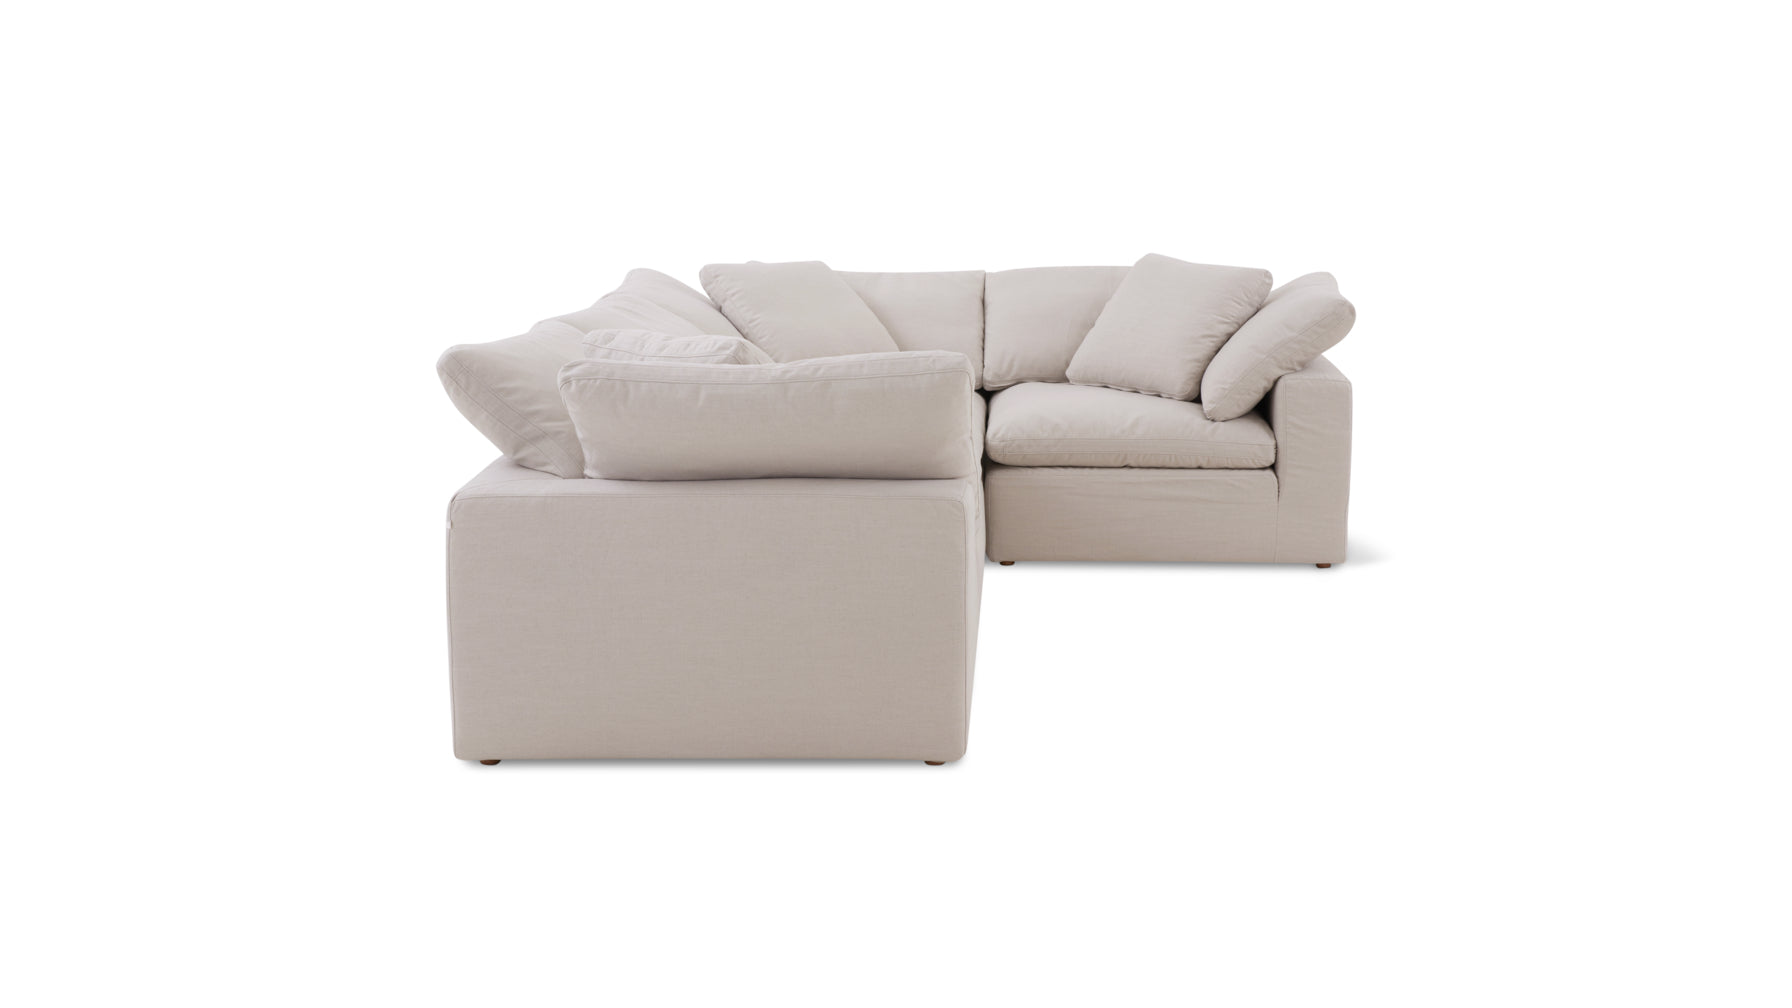 Movie Night™ 4-Piece Modular Sectional Closed, Standard, Clay - Image 7